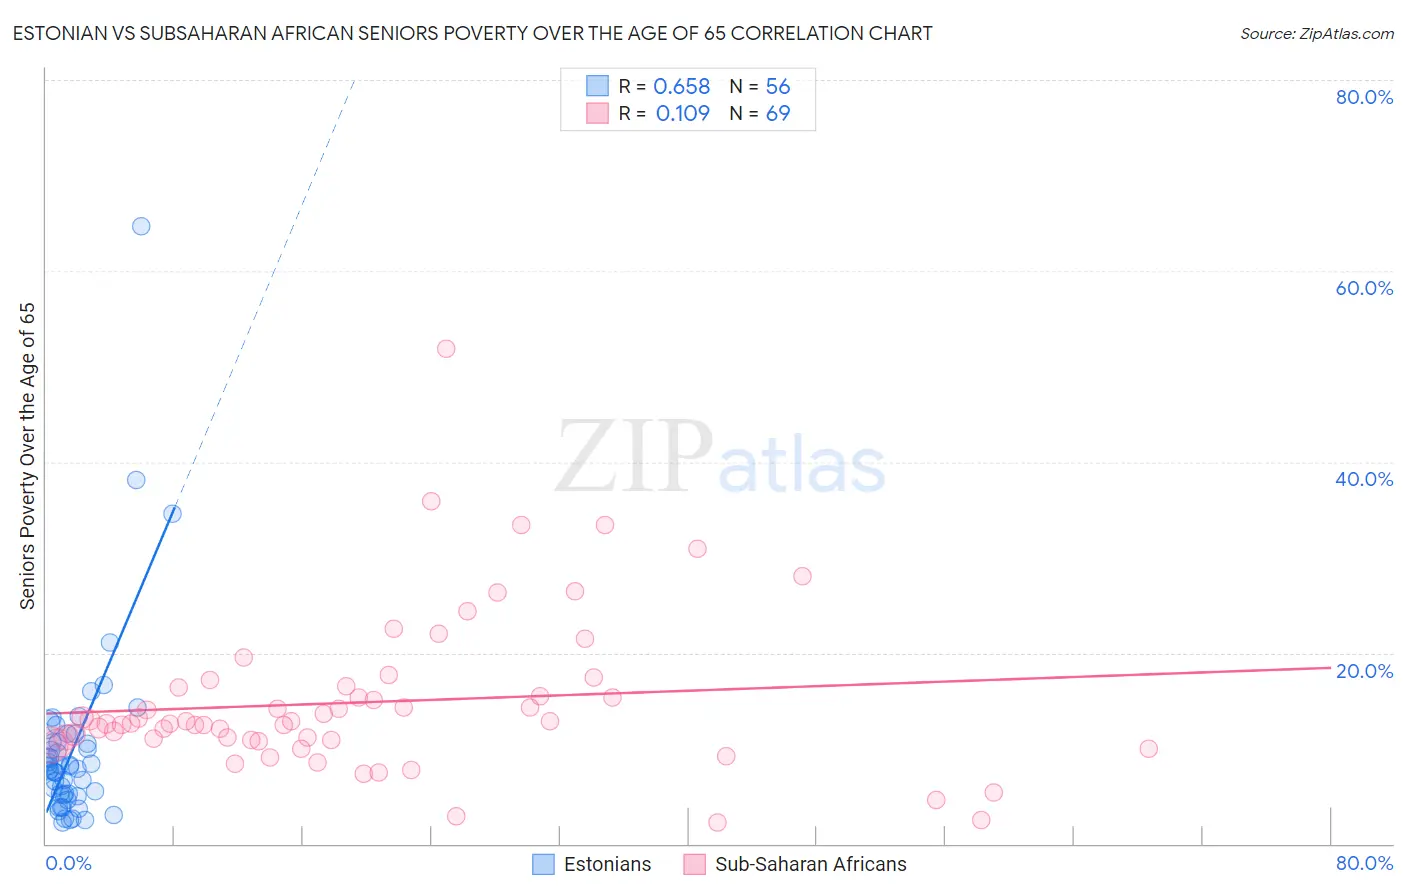 Estonian vs Subsaharan African Seniors Poverty Over the Age of 65